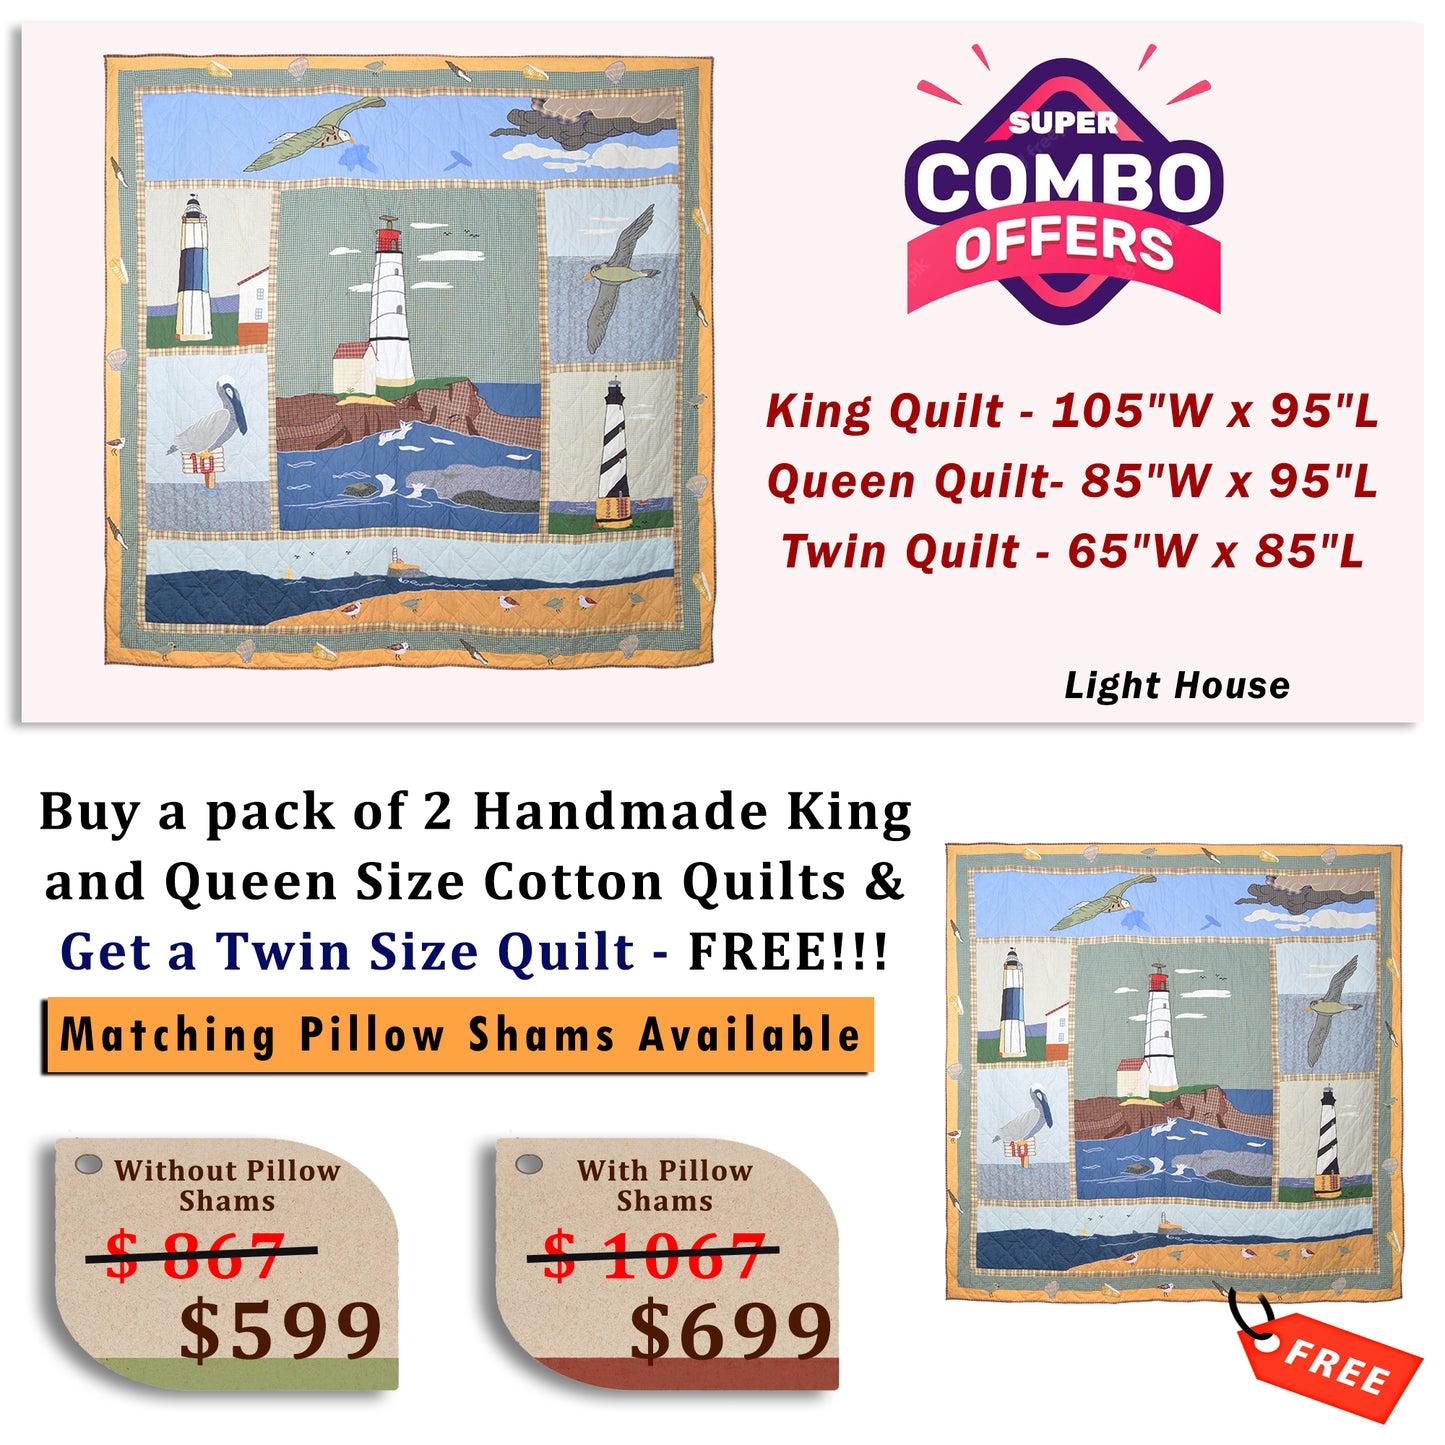 Light House - Buy a pack of King and Queen Size Quilt, and get a Twin Size Quilt FREE!!!